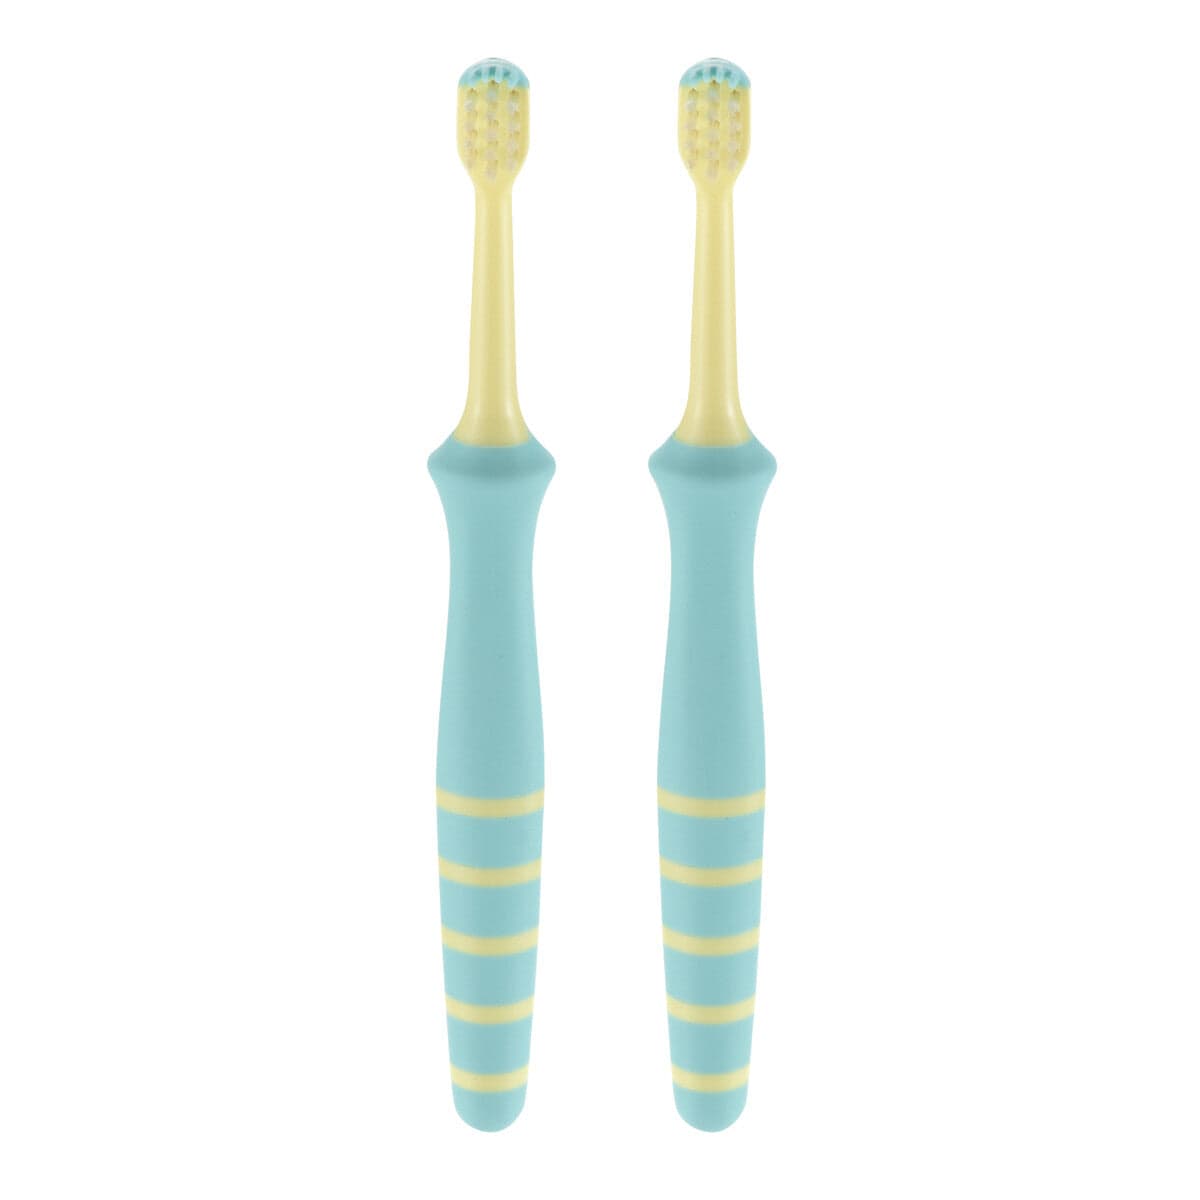 Richell - T.L.I Try Good Evening Tooth Mama Baby Toothbrush For Back Teeth (2 Pieces)    Baby Toothbrush